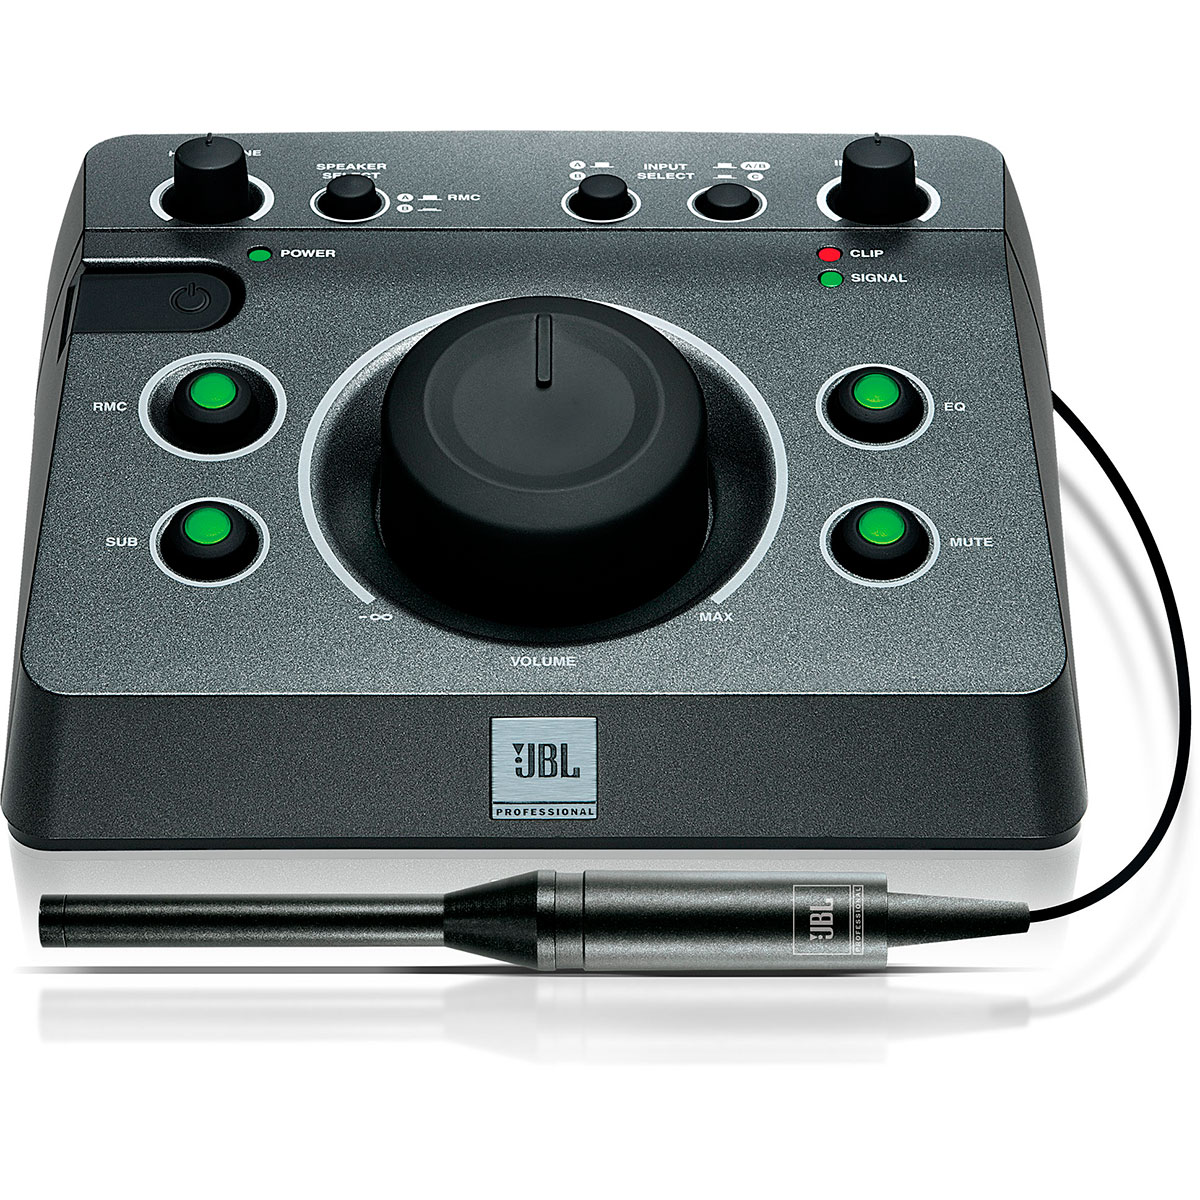 JBL MSC1 Monitor System Controller - Control monitores